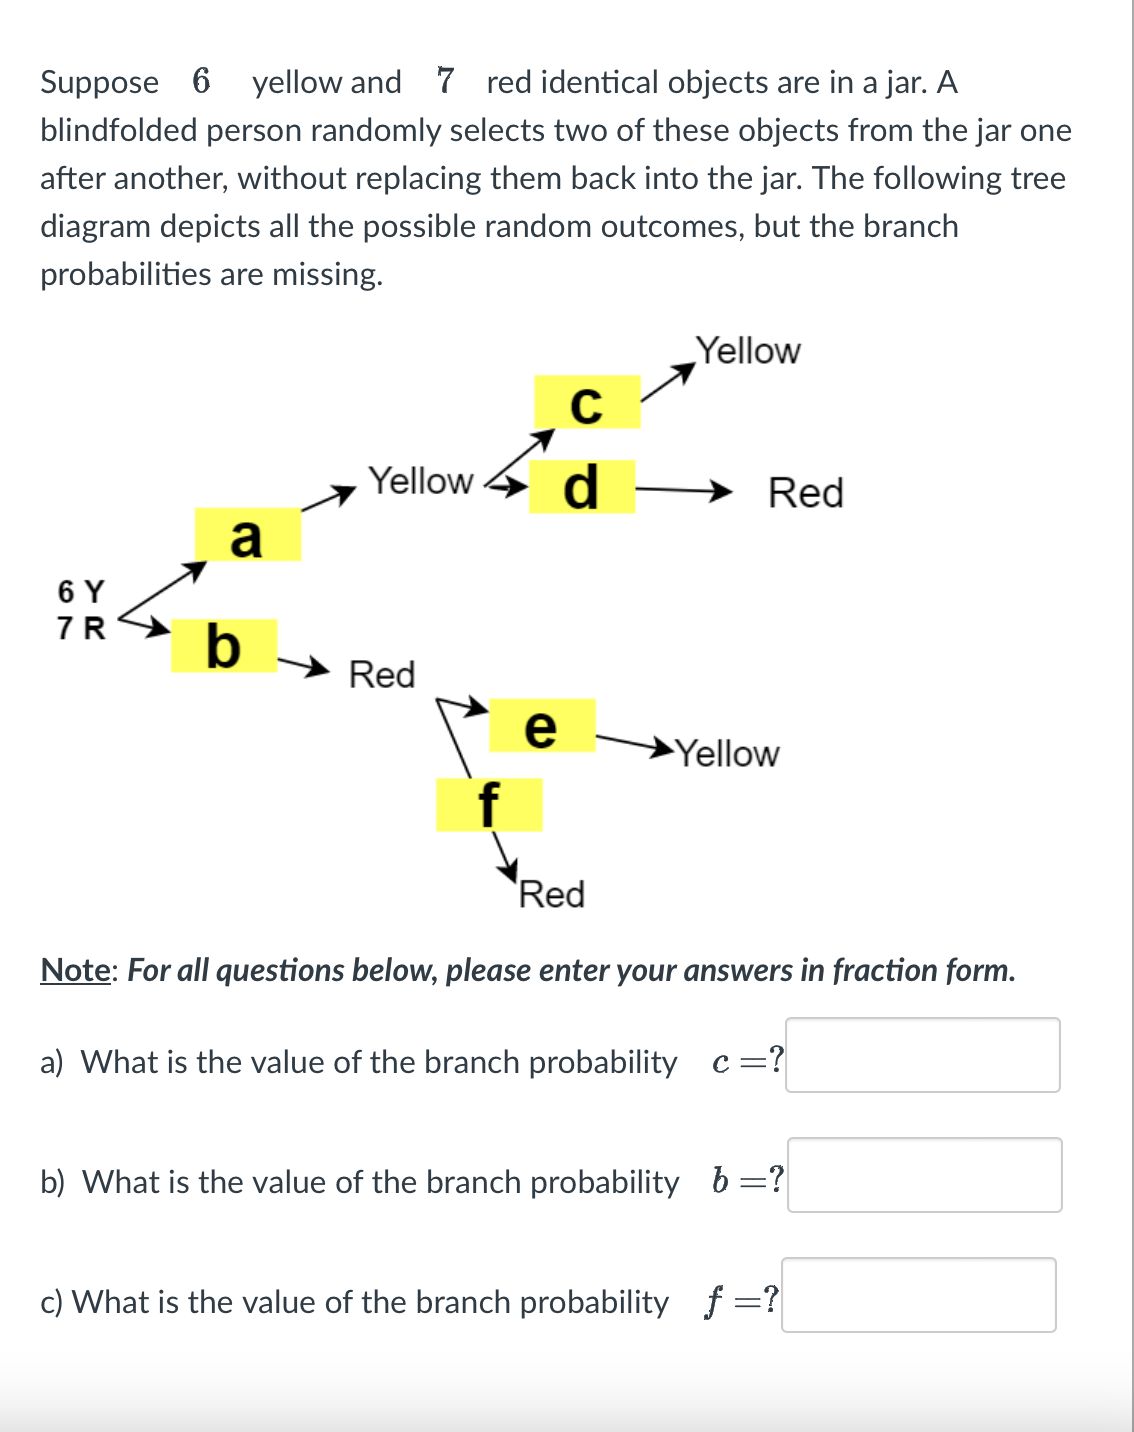 Suppose 6 yellow and 7 red identical objects are in a jar. A
blindfolded person randomly selects two of these objects from the jar one
after another, without replacing them back into the jar. The following tree
diagram depicts all the possible random outcomes, but the branch
probabilities are missing.
6 Y
7R
a
b
C
Yellow d
Red
e
Yellow
Red
Yellow
Red
Note: For all questions below, please enter your answers in fraction form.
a) What is the value of the branch probability c =?
b) What is the value of the branch probability b =?
c) What is the value of the branch probability f=?